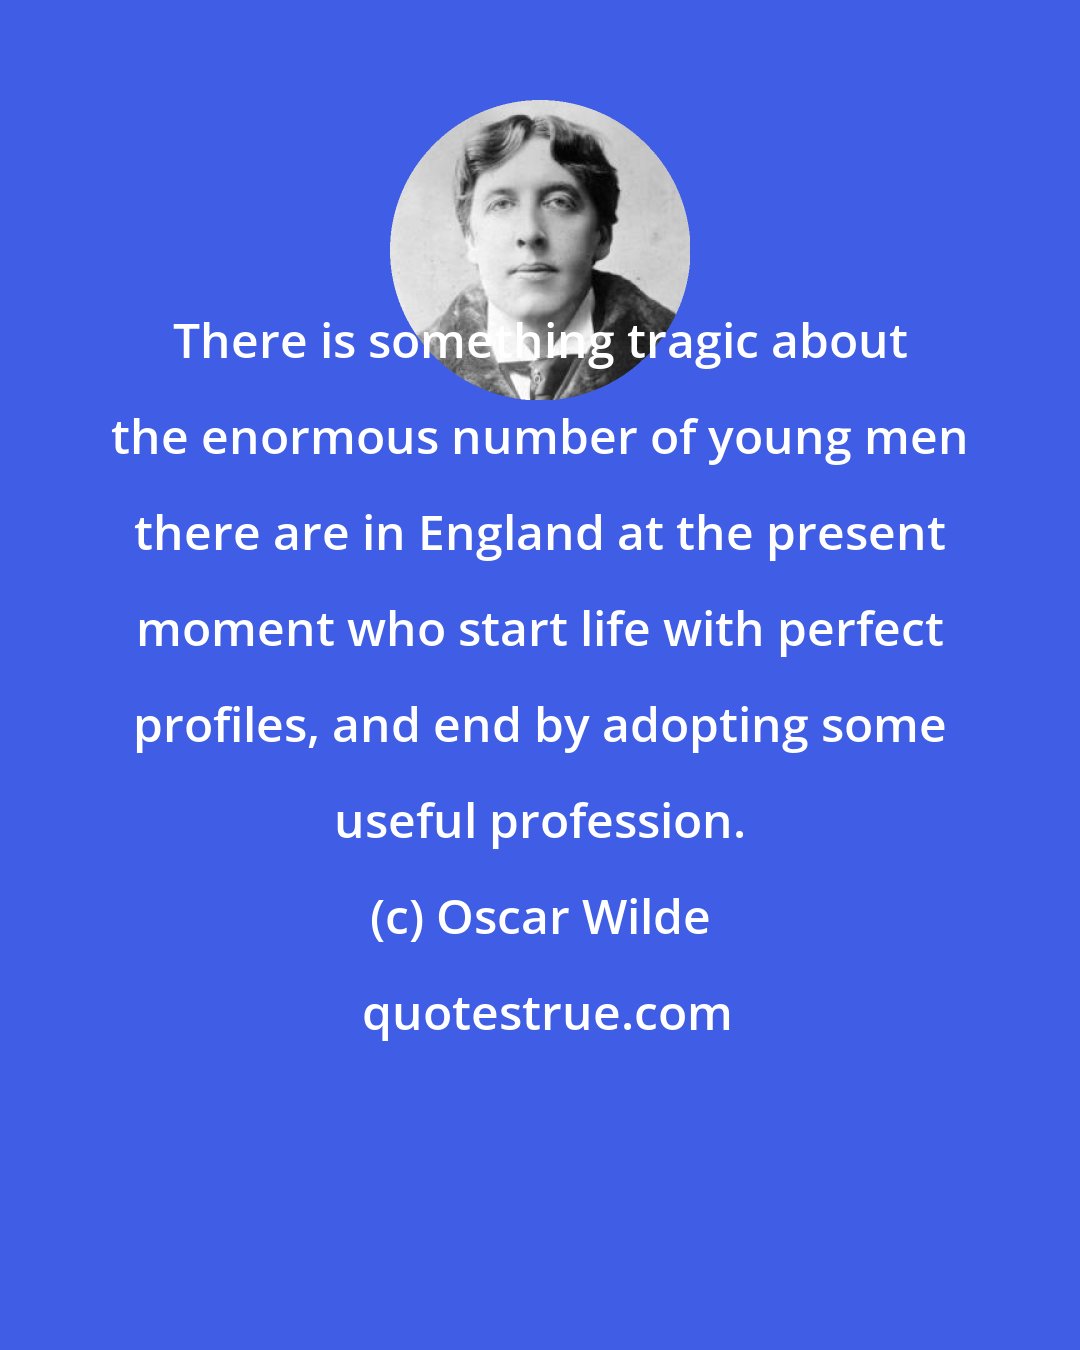 Oscar Wilde: There is something tragic about the enormous number of young men there are in England at the present moment who start life with perfect profiles, and end by adopting some useful profession.